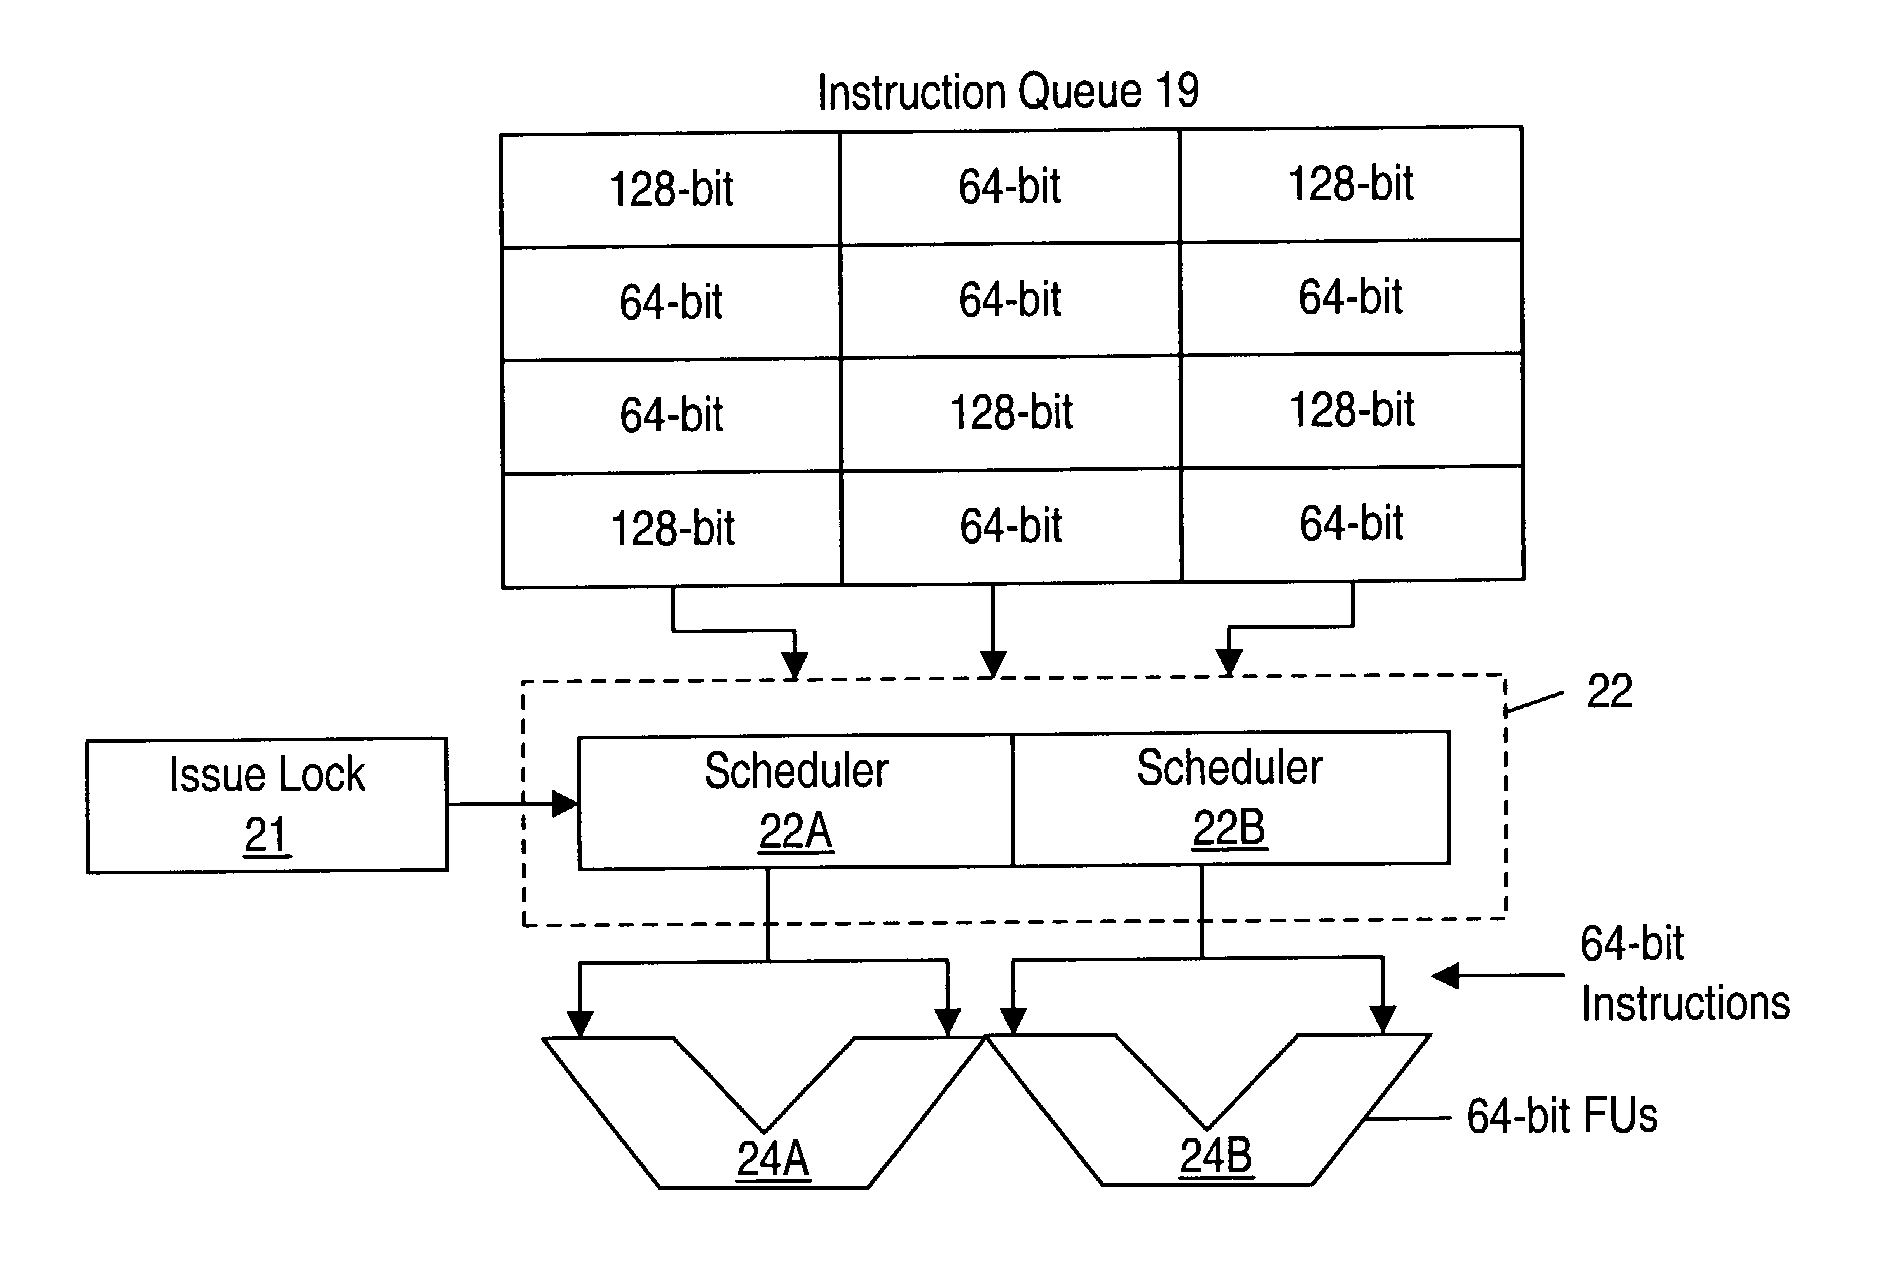 Apparatus and method for independently schedulable functional units with issue lock mechanism in a processor